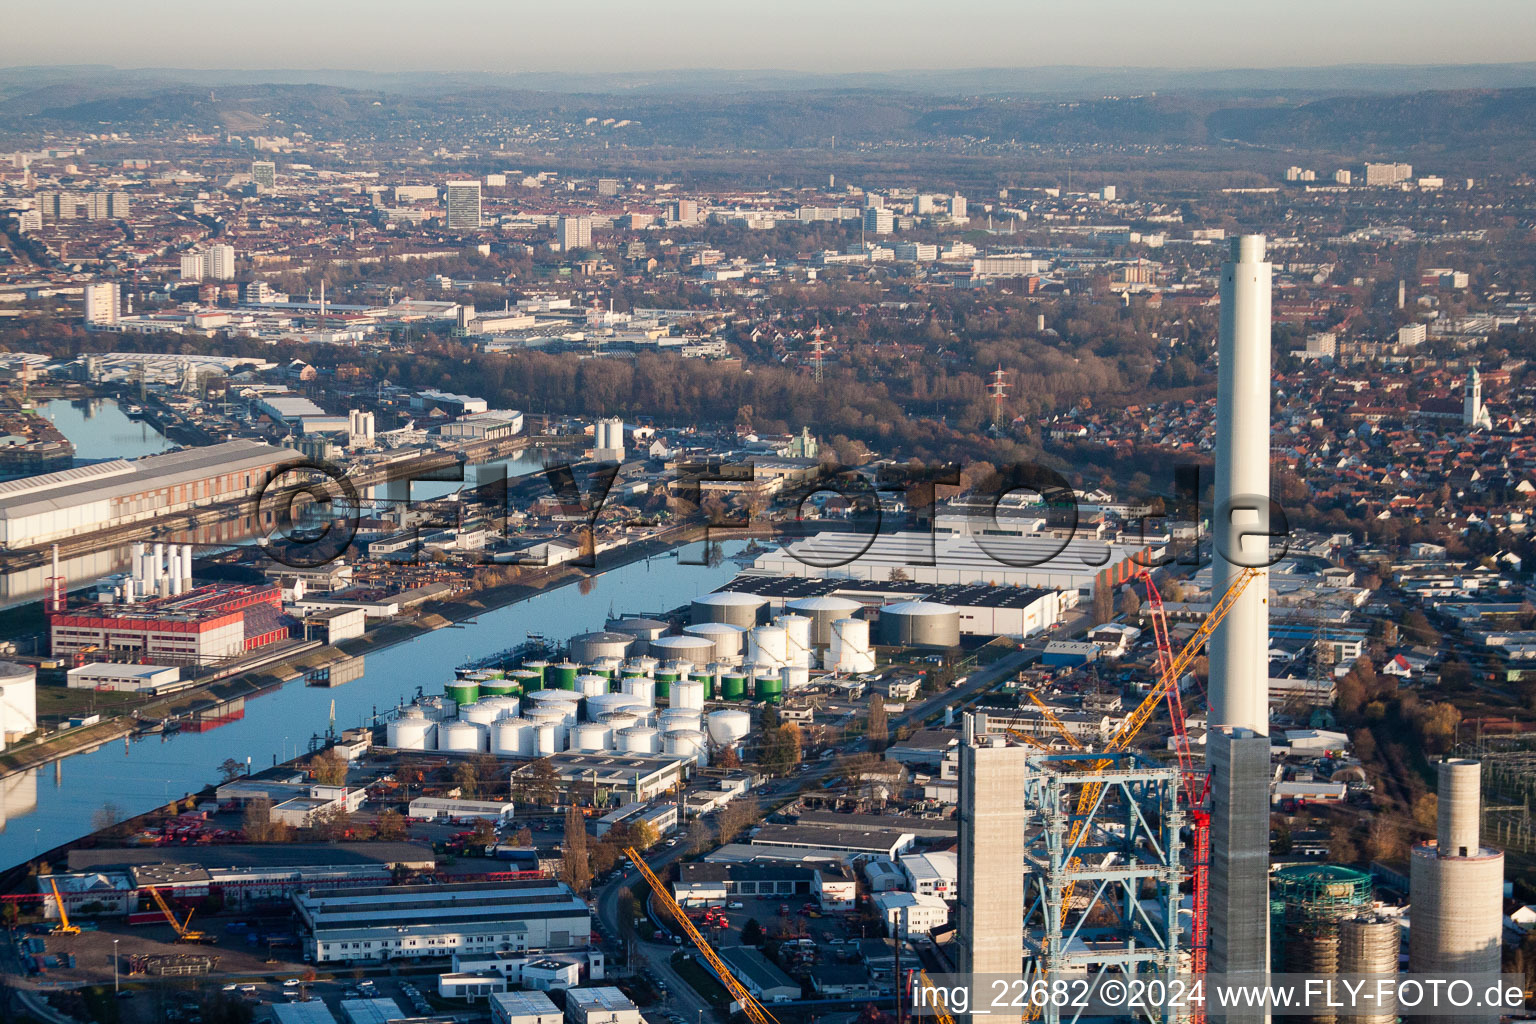 EnBW power plant in the district Rheinhafen in Karlsruhe in the state Baden-Wuerttemberg, Germany seen from a drone